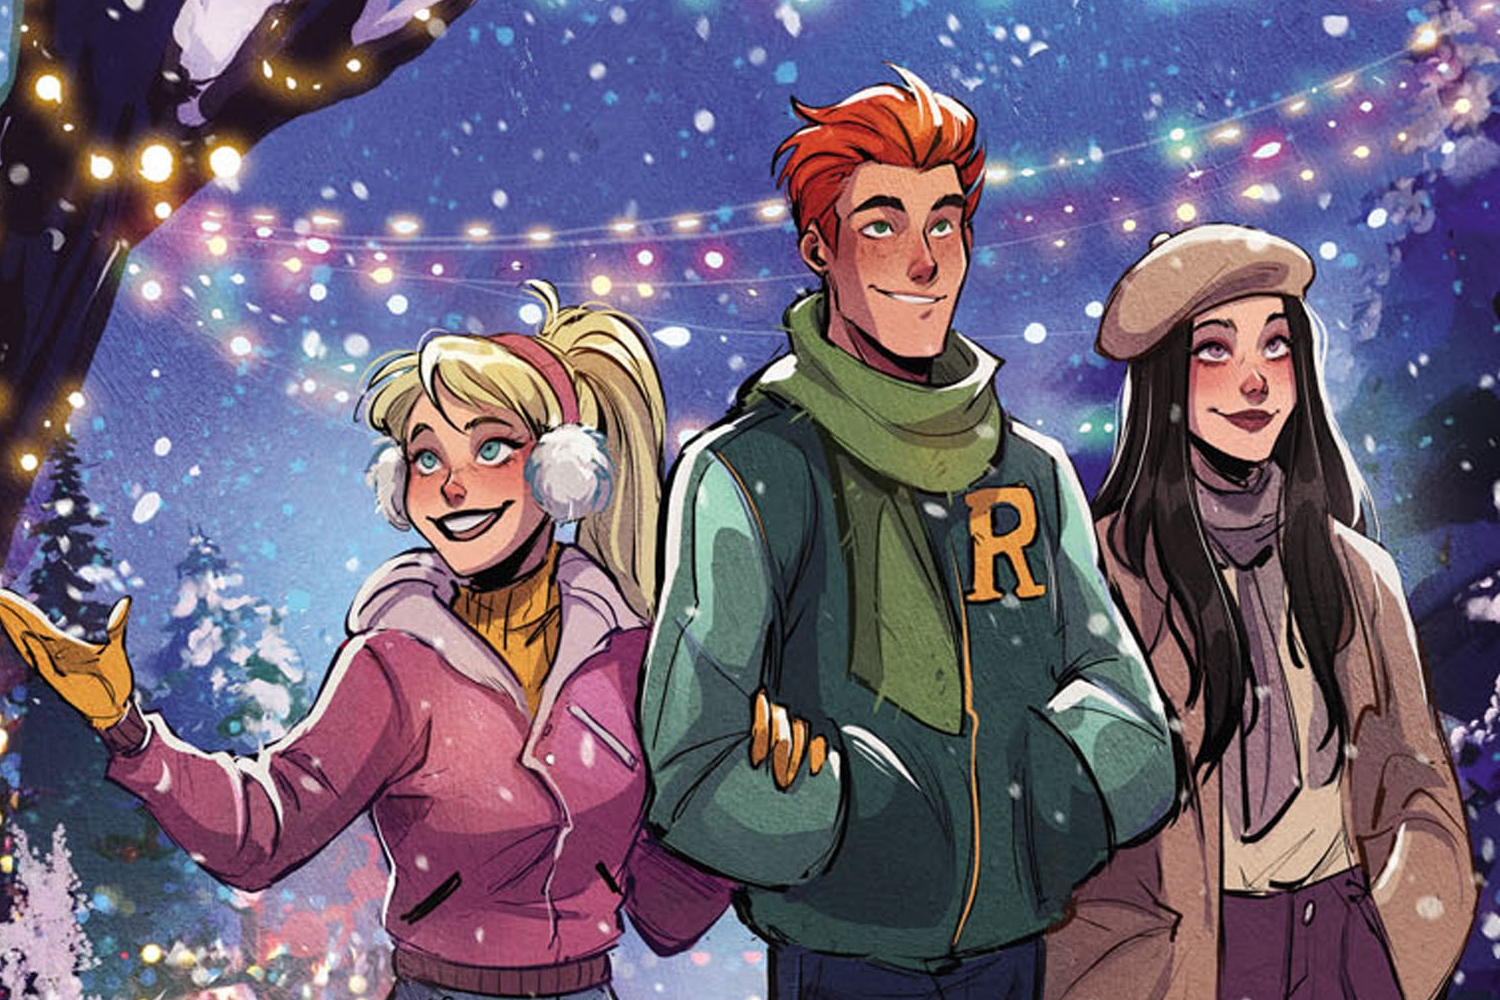 Interview: Crafting holiday high school cheer in 'Archie's Holiday Magic Special'